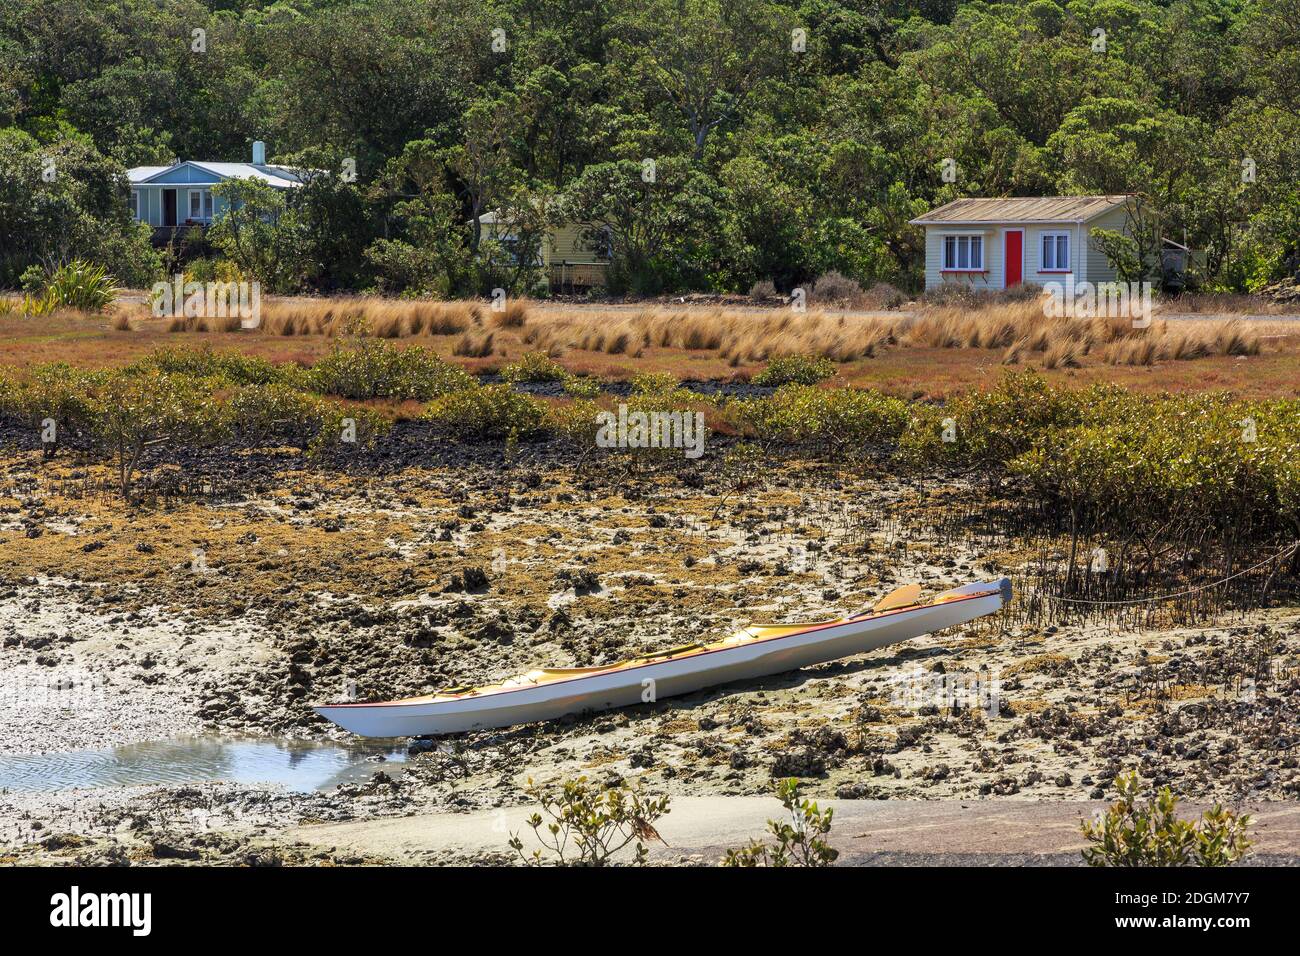 A kayak on the shore of Rangitoto Island, New Zealand. In the forest in the background are two of the island's 'baches', or holiday homes Stock Photo